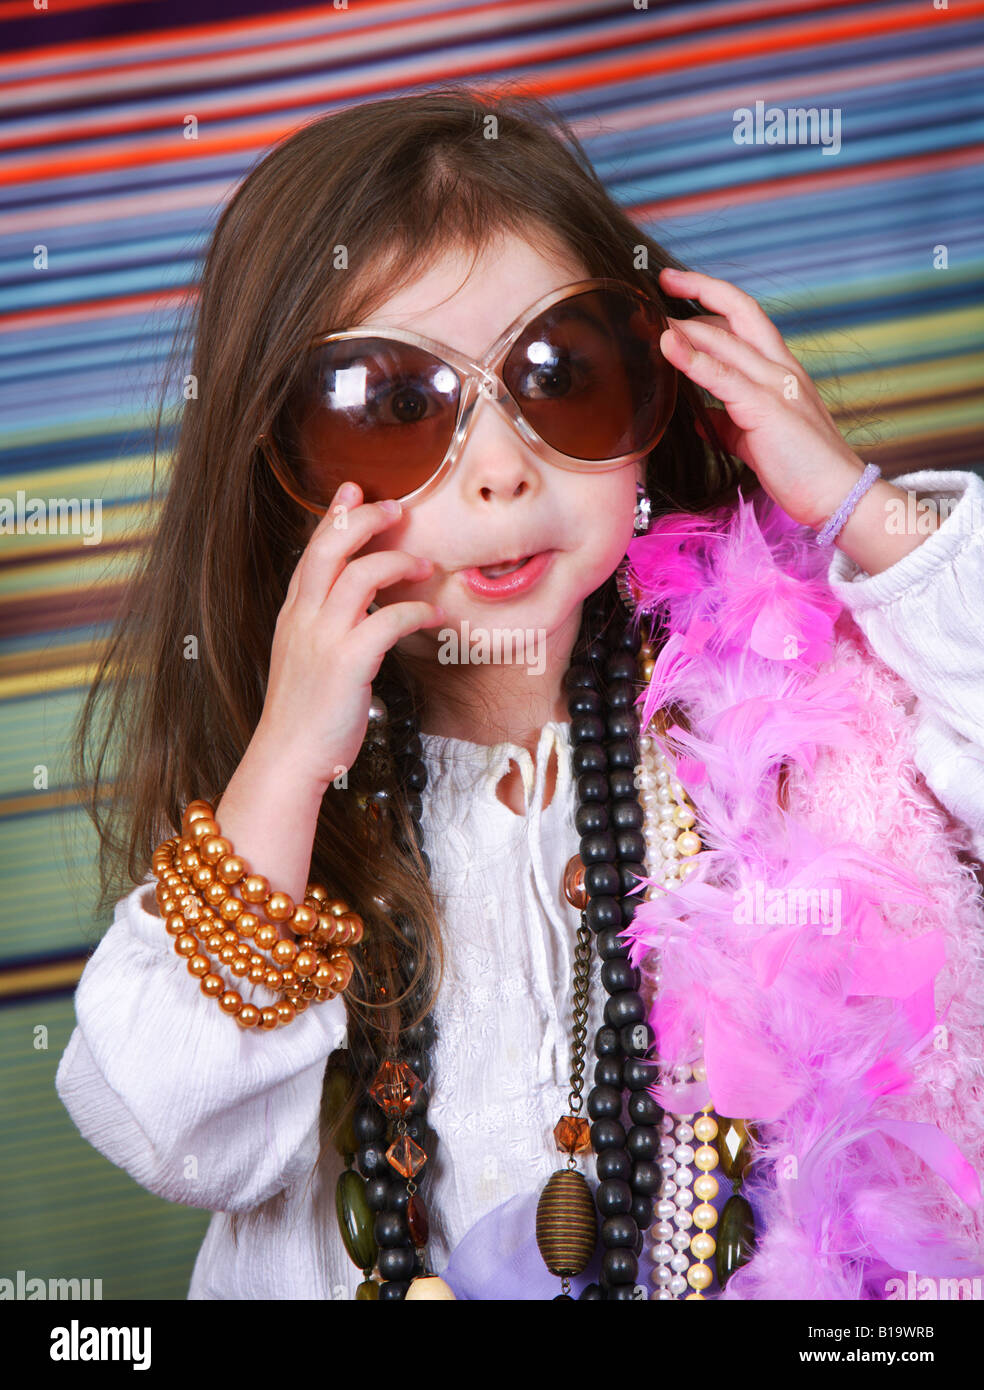 Girl in dress up clothes Stock Photo